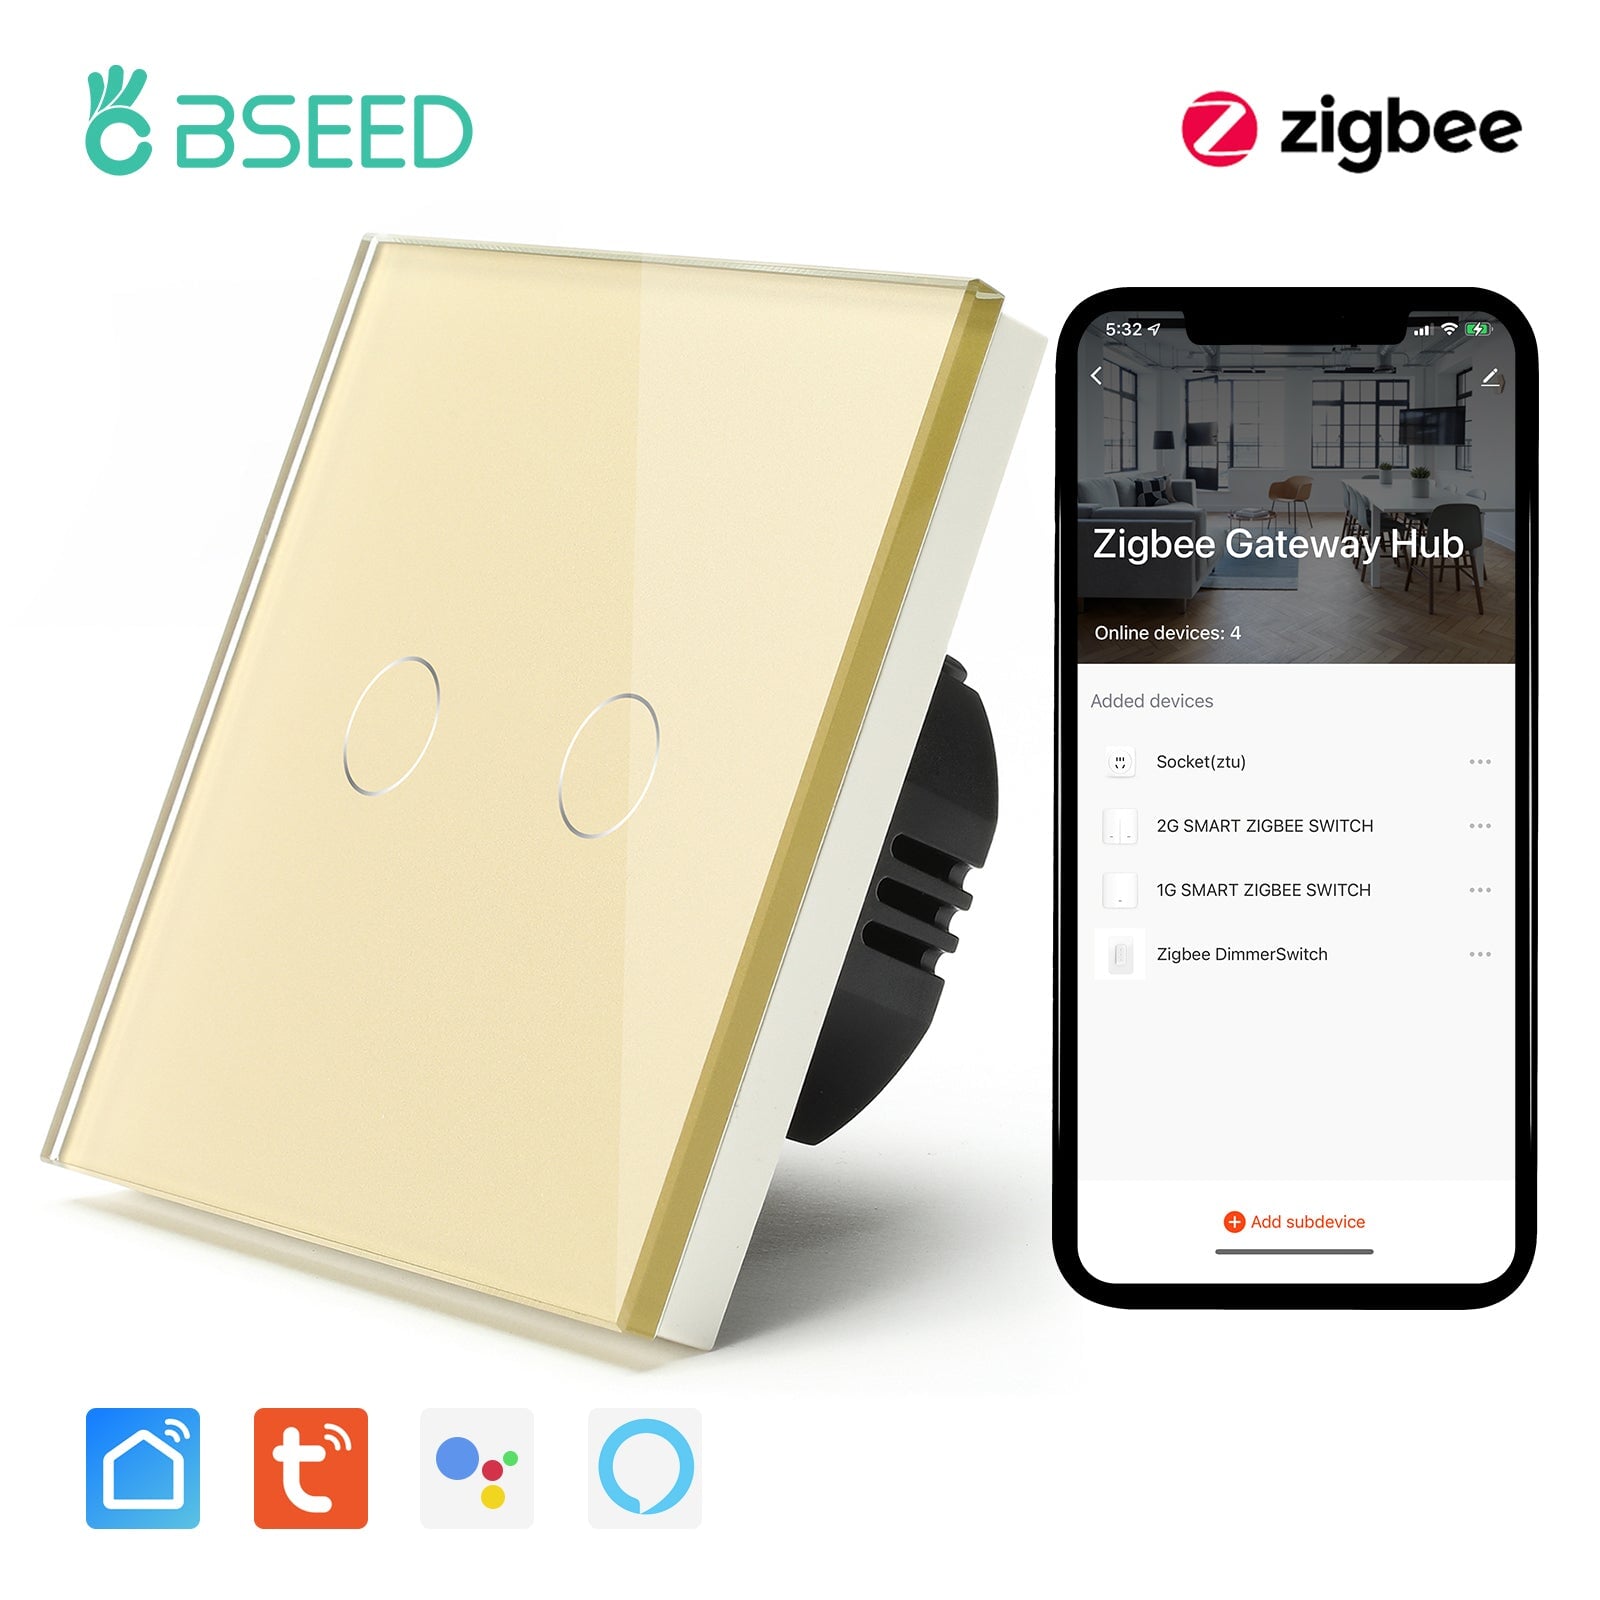 BSEED Zigbee Single Live Line Switch 1/2/3 Gang 1/2/3 Way Wall Smart Light Switch Single Live Line 1/2/3 pack Light Switches Bseedswitch Golden 2Gang 1 Pcs/Pack